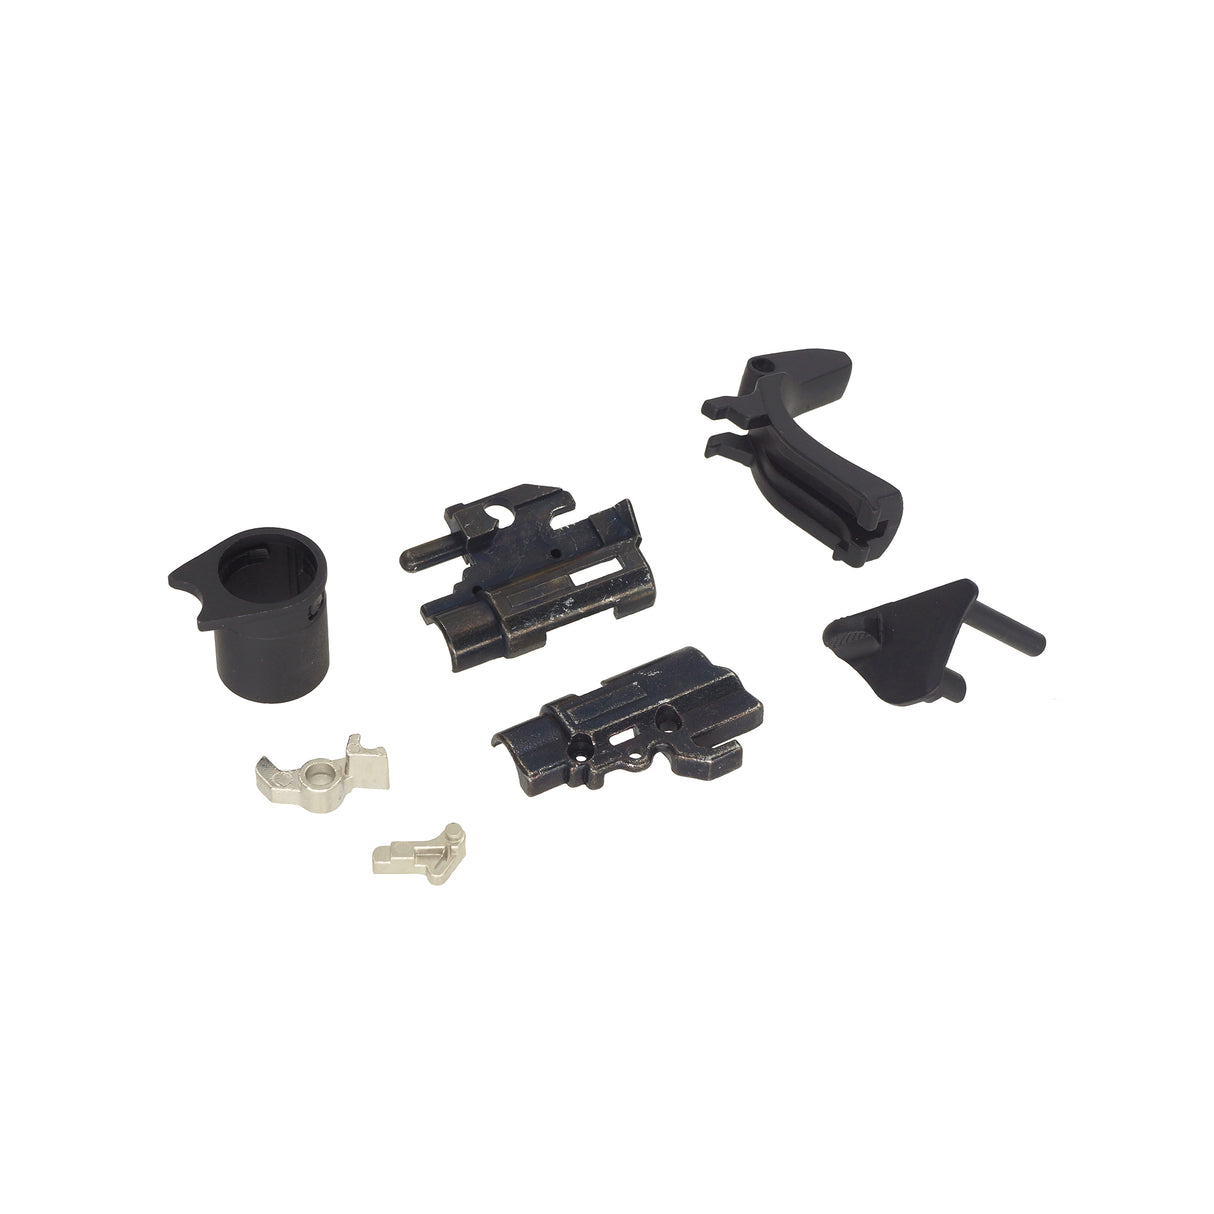 Double Bell Original Replacement Internal Parts for M1911 ( 1911-HJP )